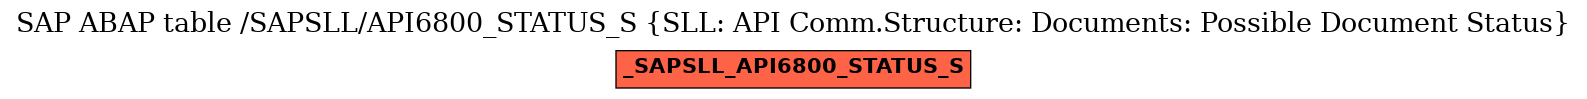 E-R Diagram for table /SAPSLL/API6800_STATUS_S (SLL: API Comm.Structure: Documents: Possible Document Status)